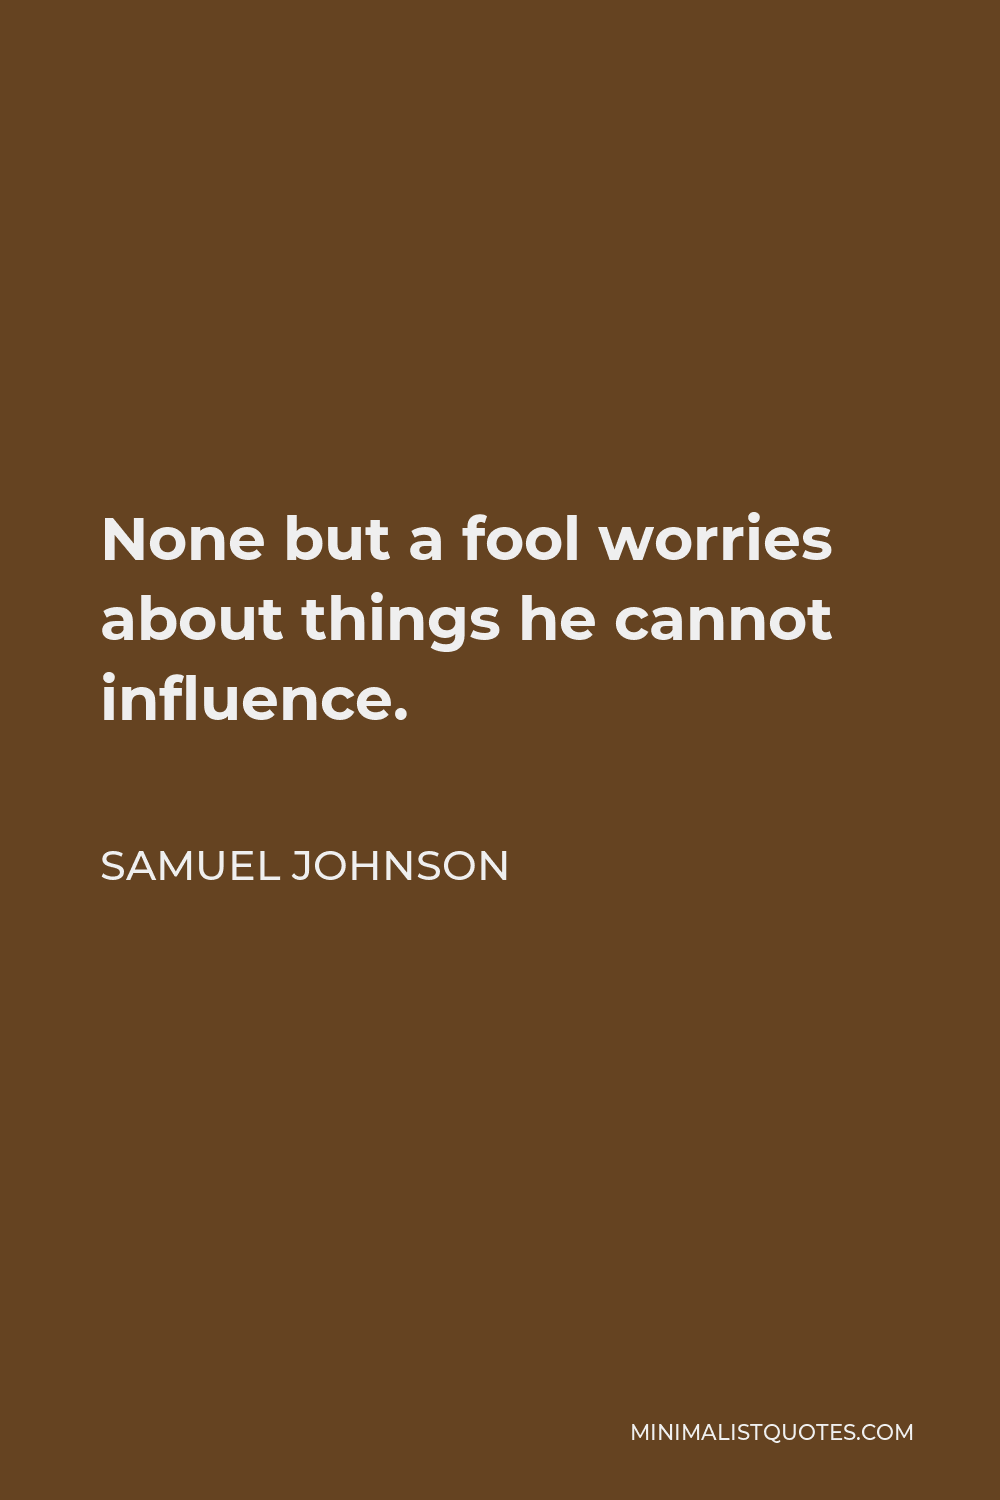 Samuel Johnson Quote - None but a fool worries about things he cannot influence.